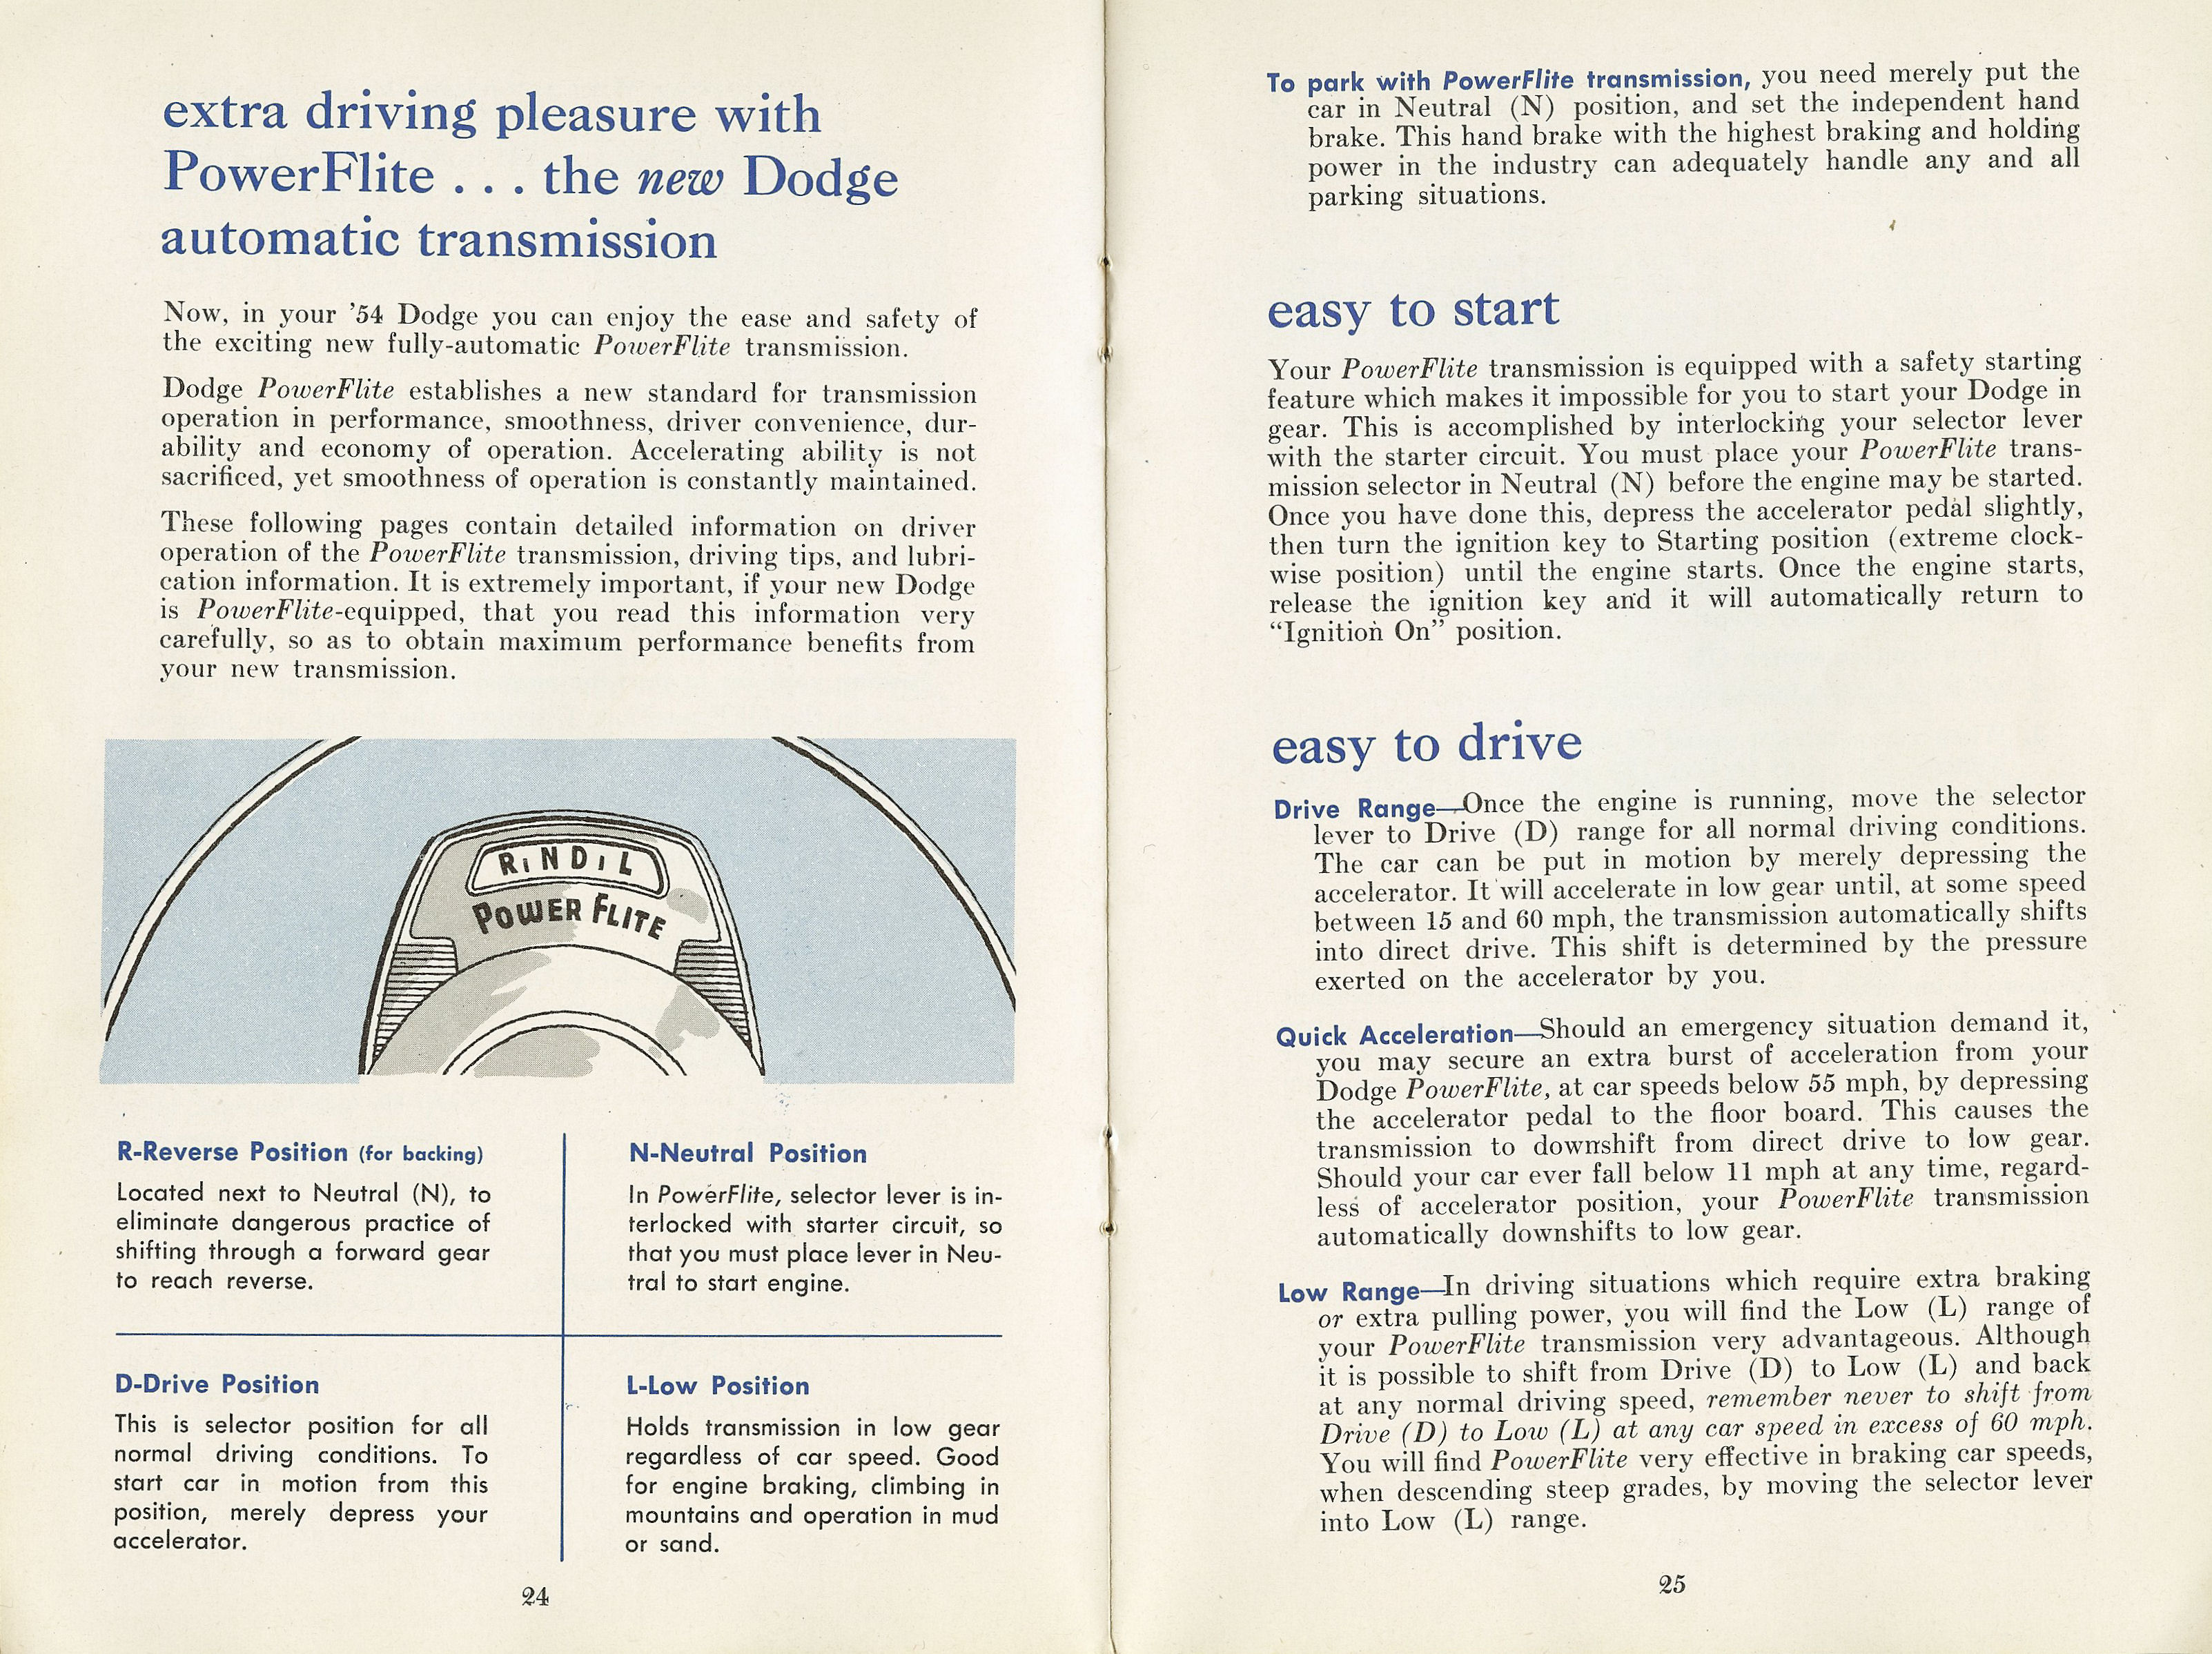 1954 Dodge Owners Manual-24-25